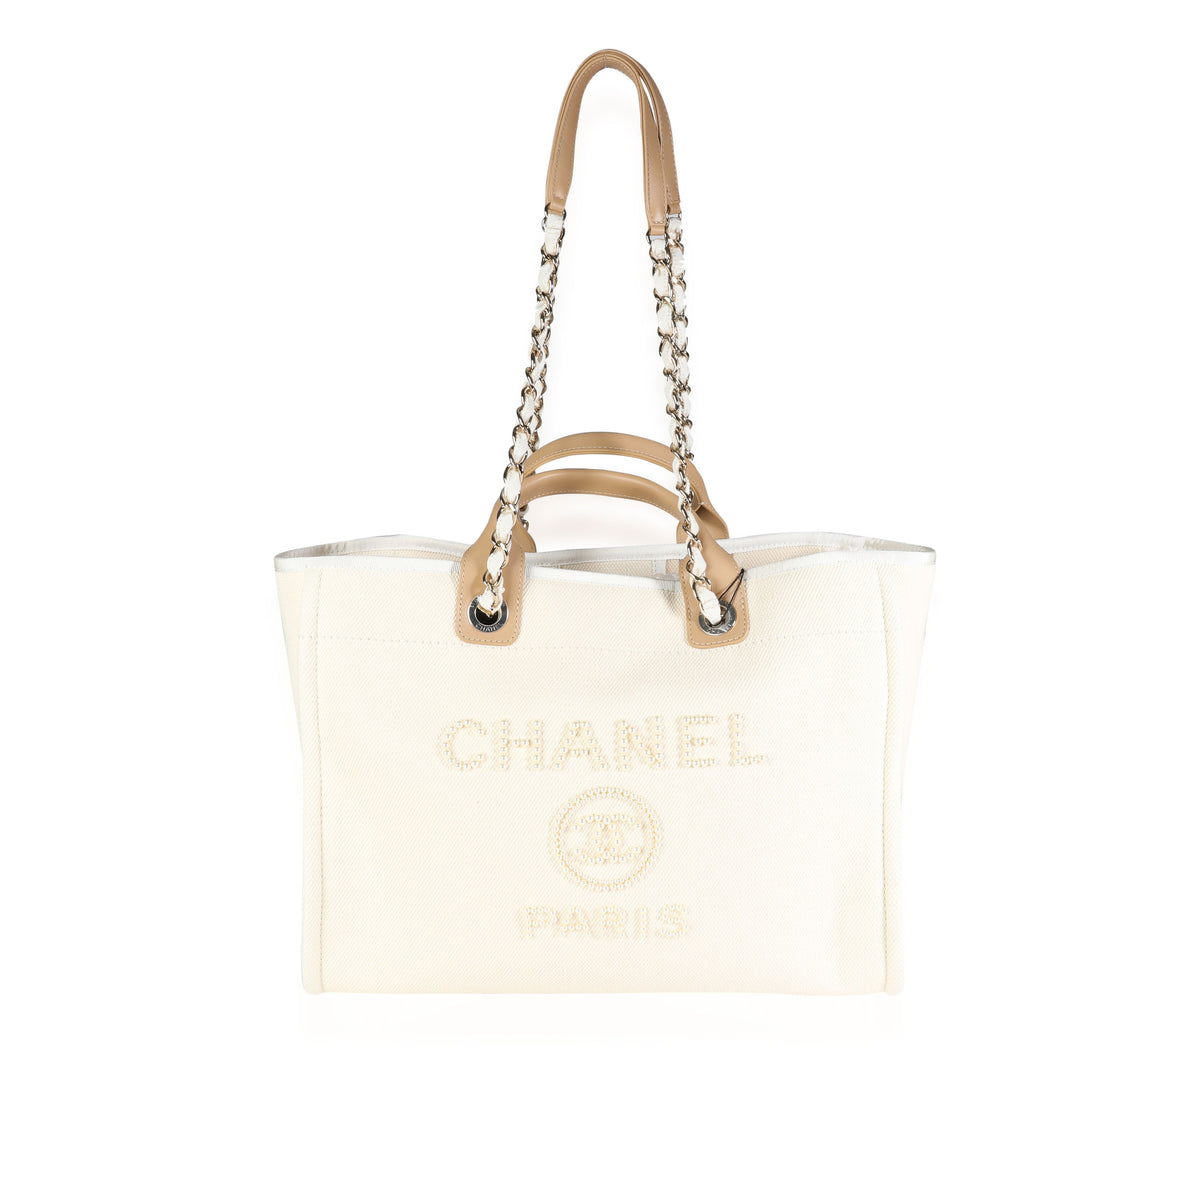 Chanel Natural Canvas and Tan Leather Large Pearl Deauville Tote